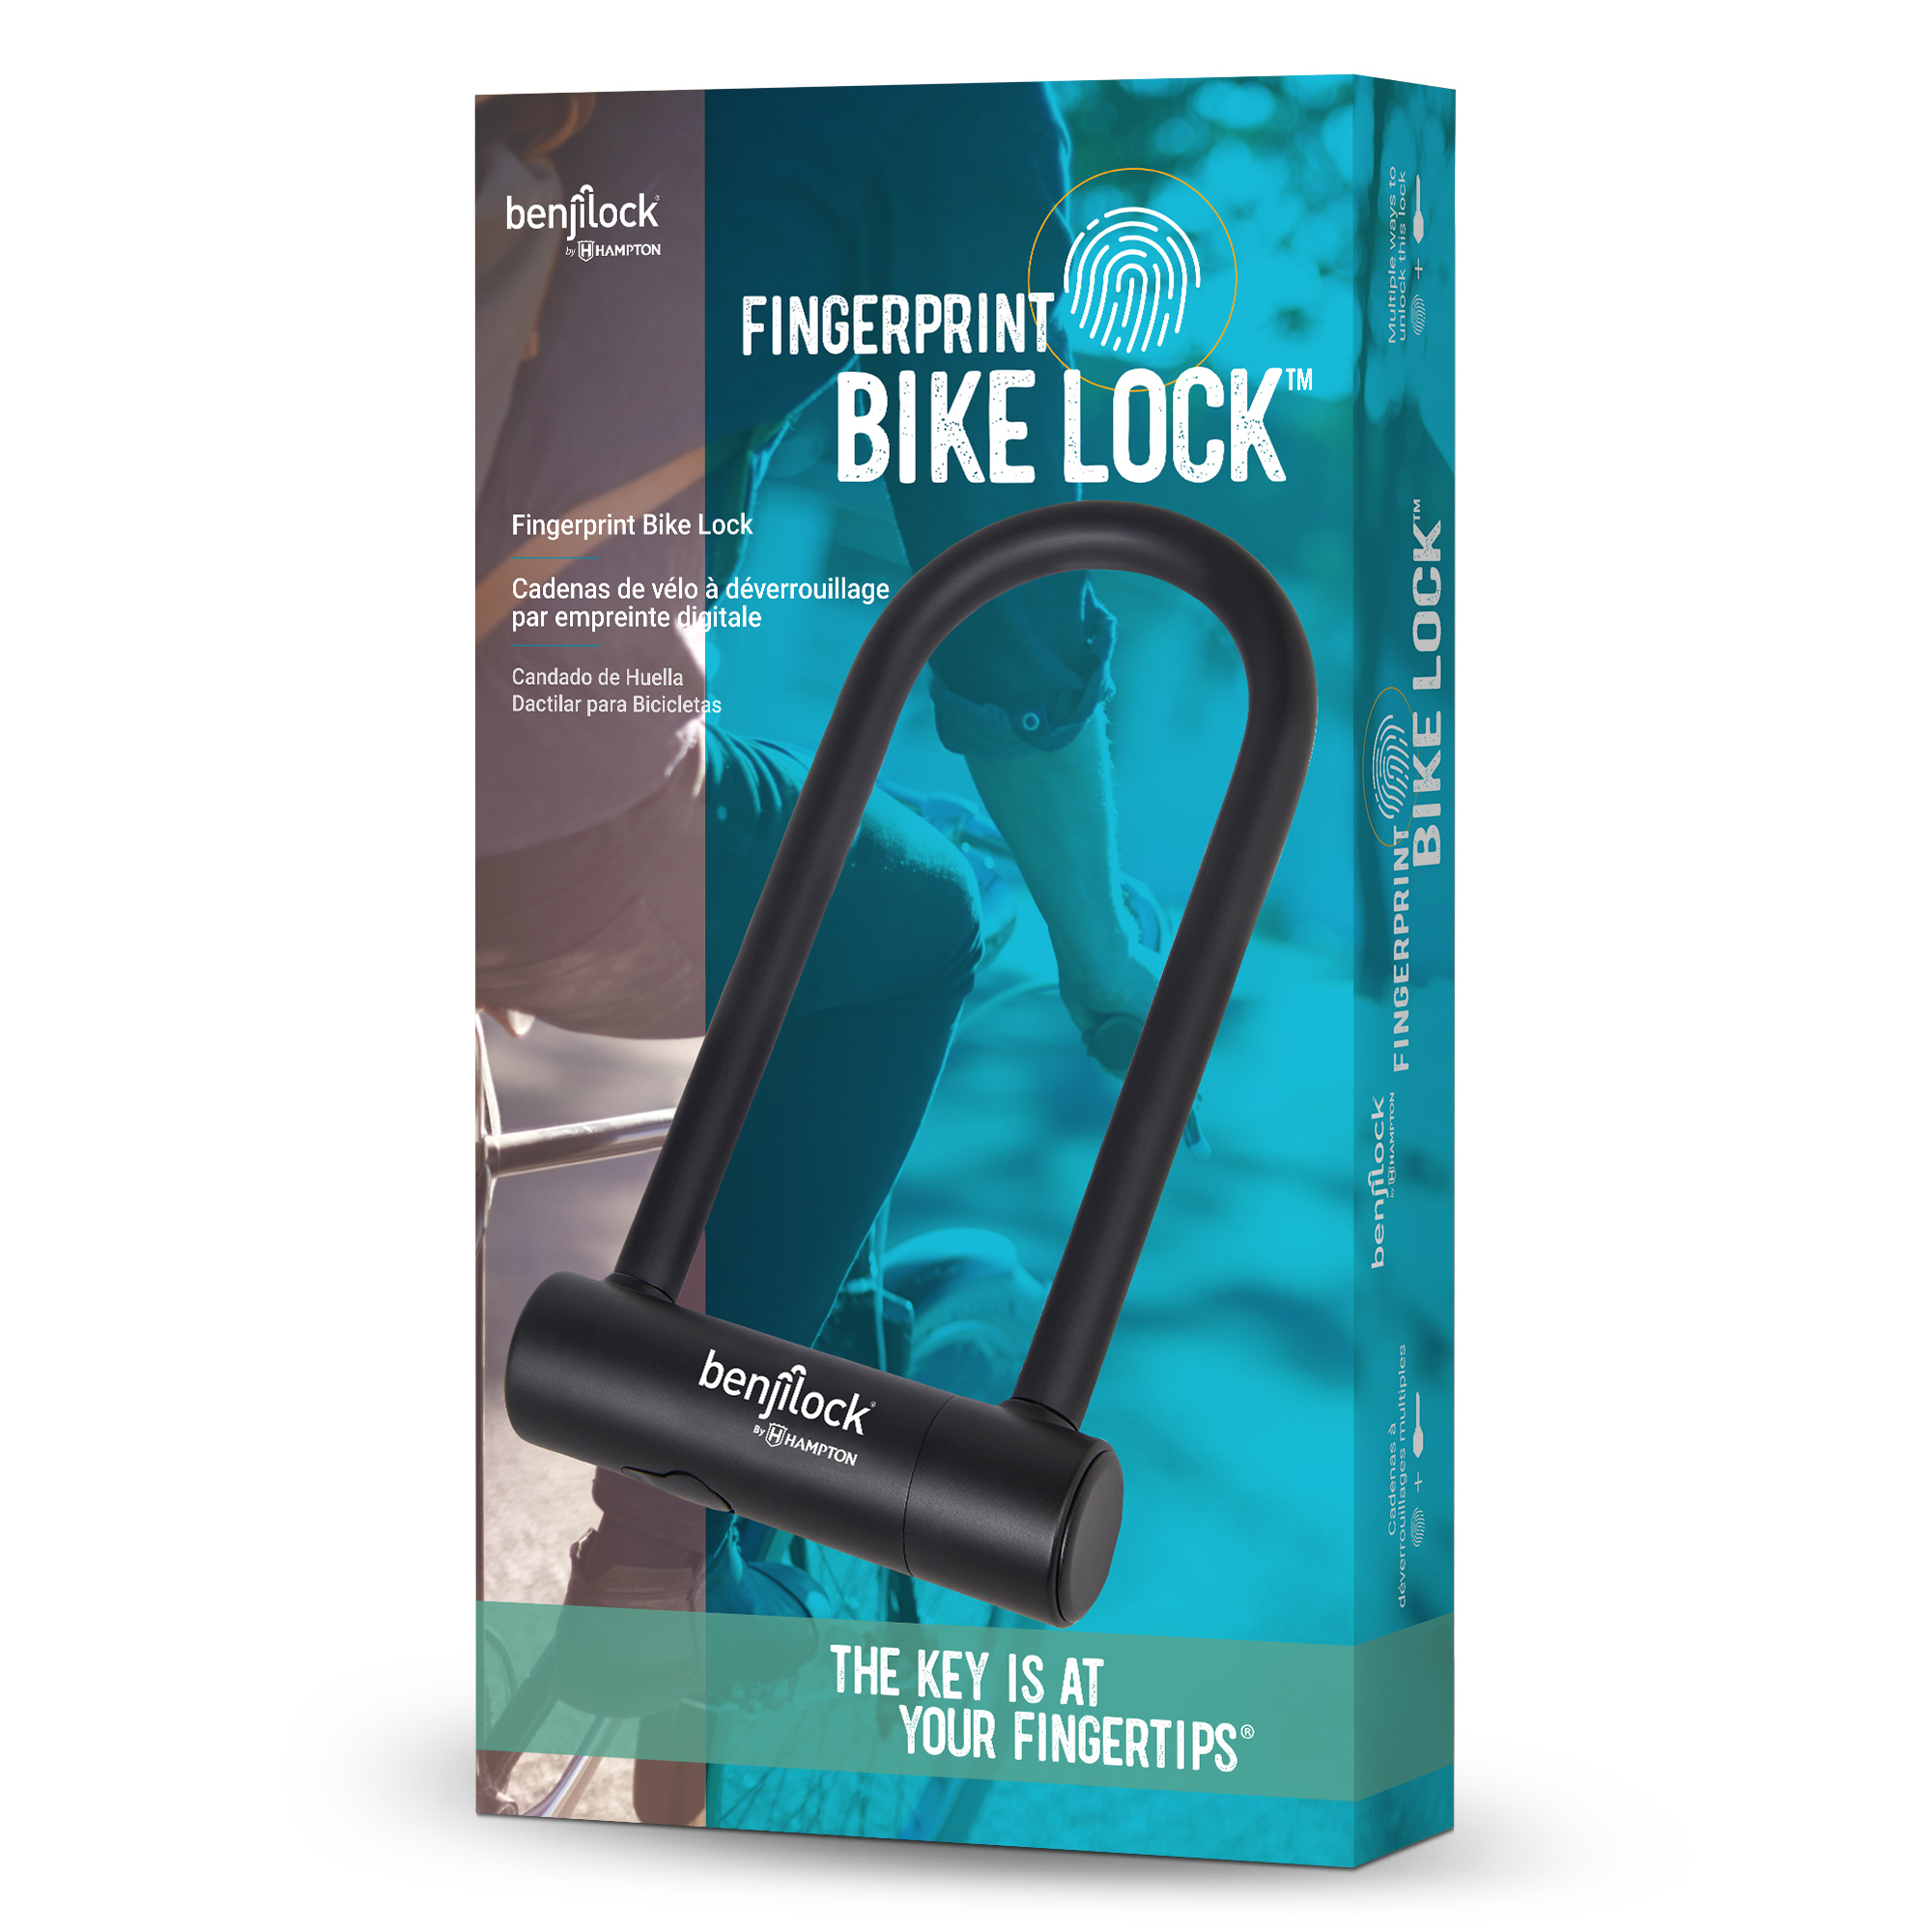 Hampton Products introduces biometric luggage lock at The Travel